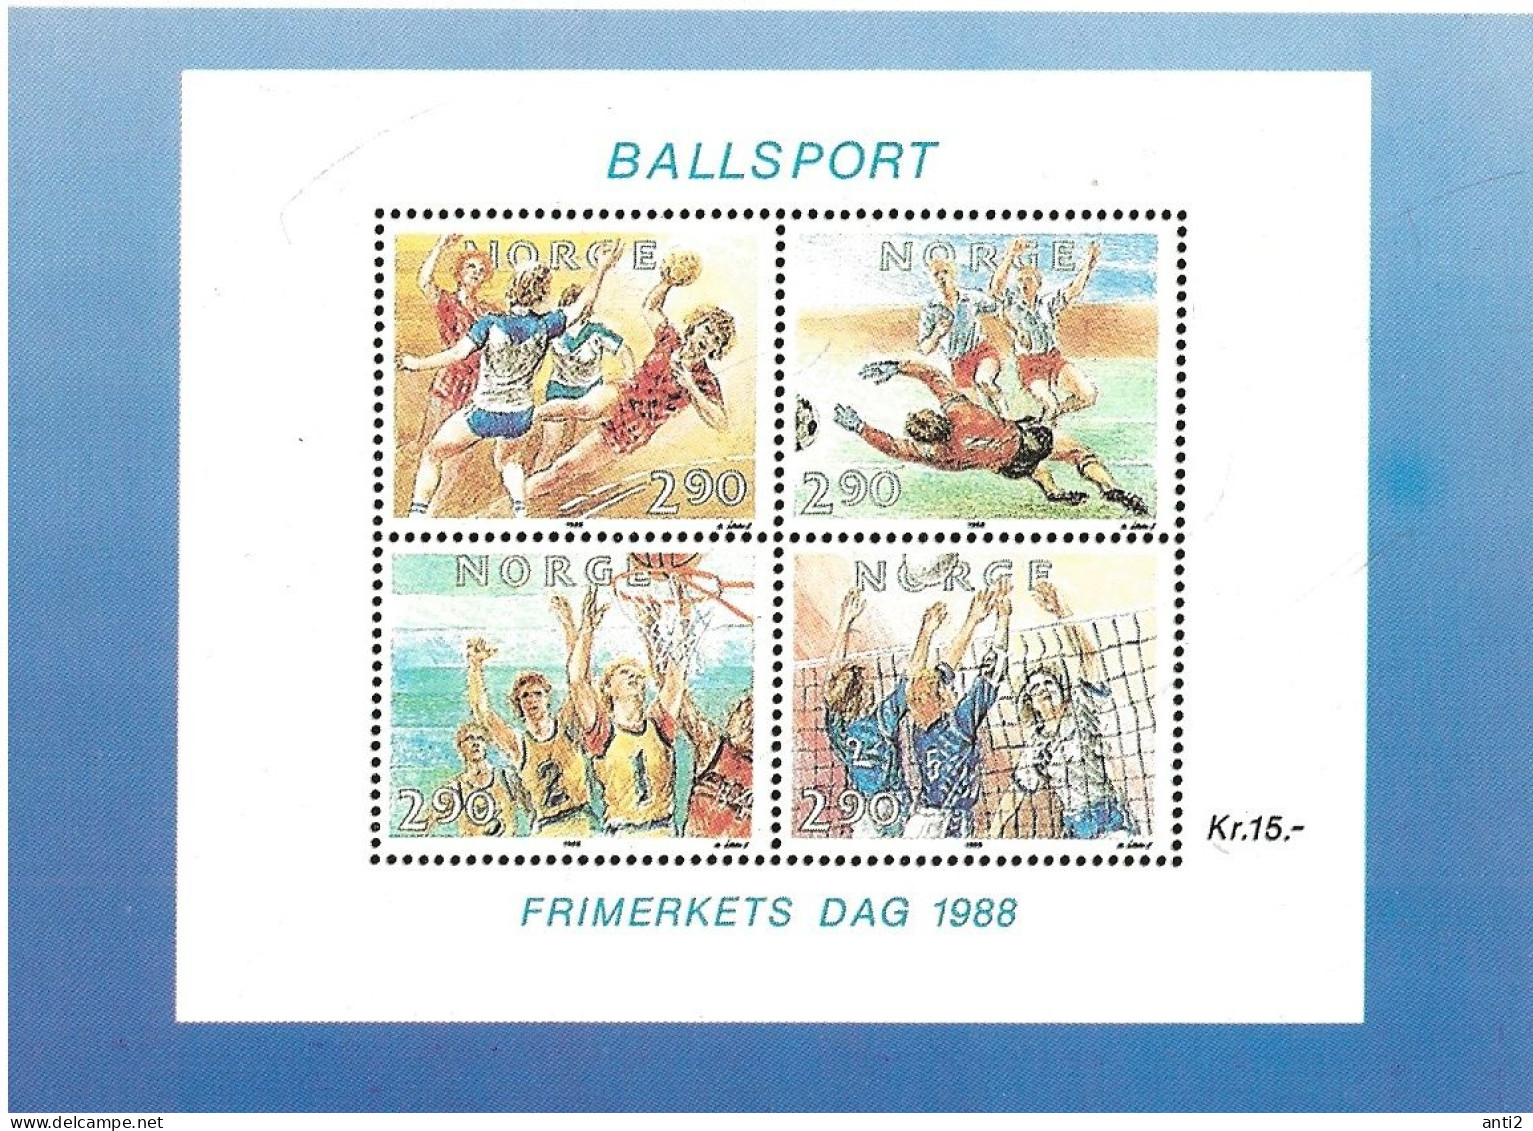 Norway 1988 Card With Imprinted Stamps Stamps Day  - Bloc Ballsports,  Maximum Card  Unused - Lettres & Documents